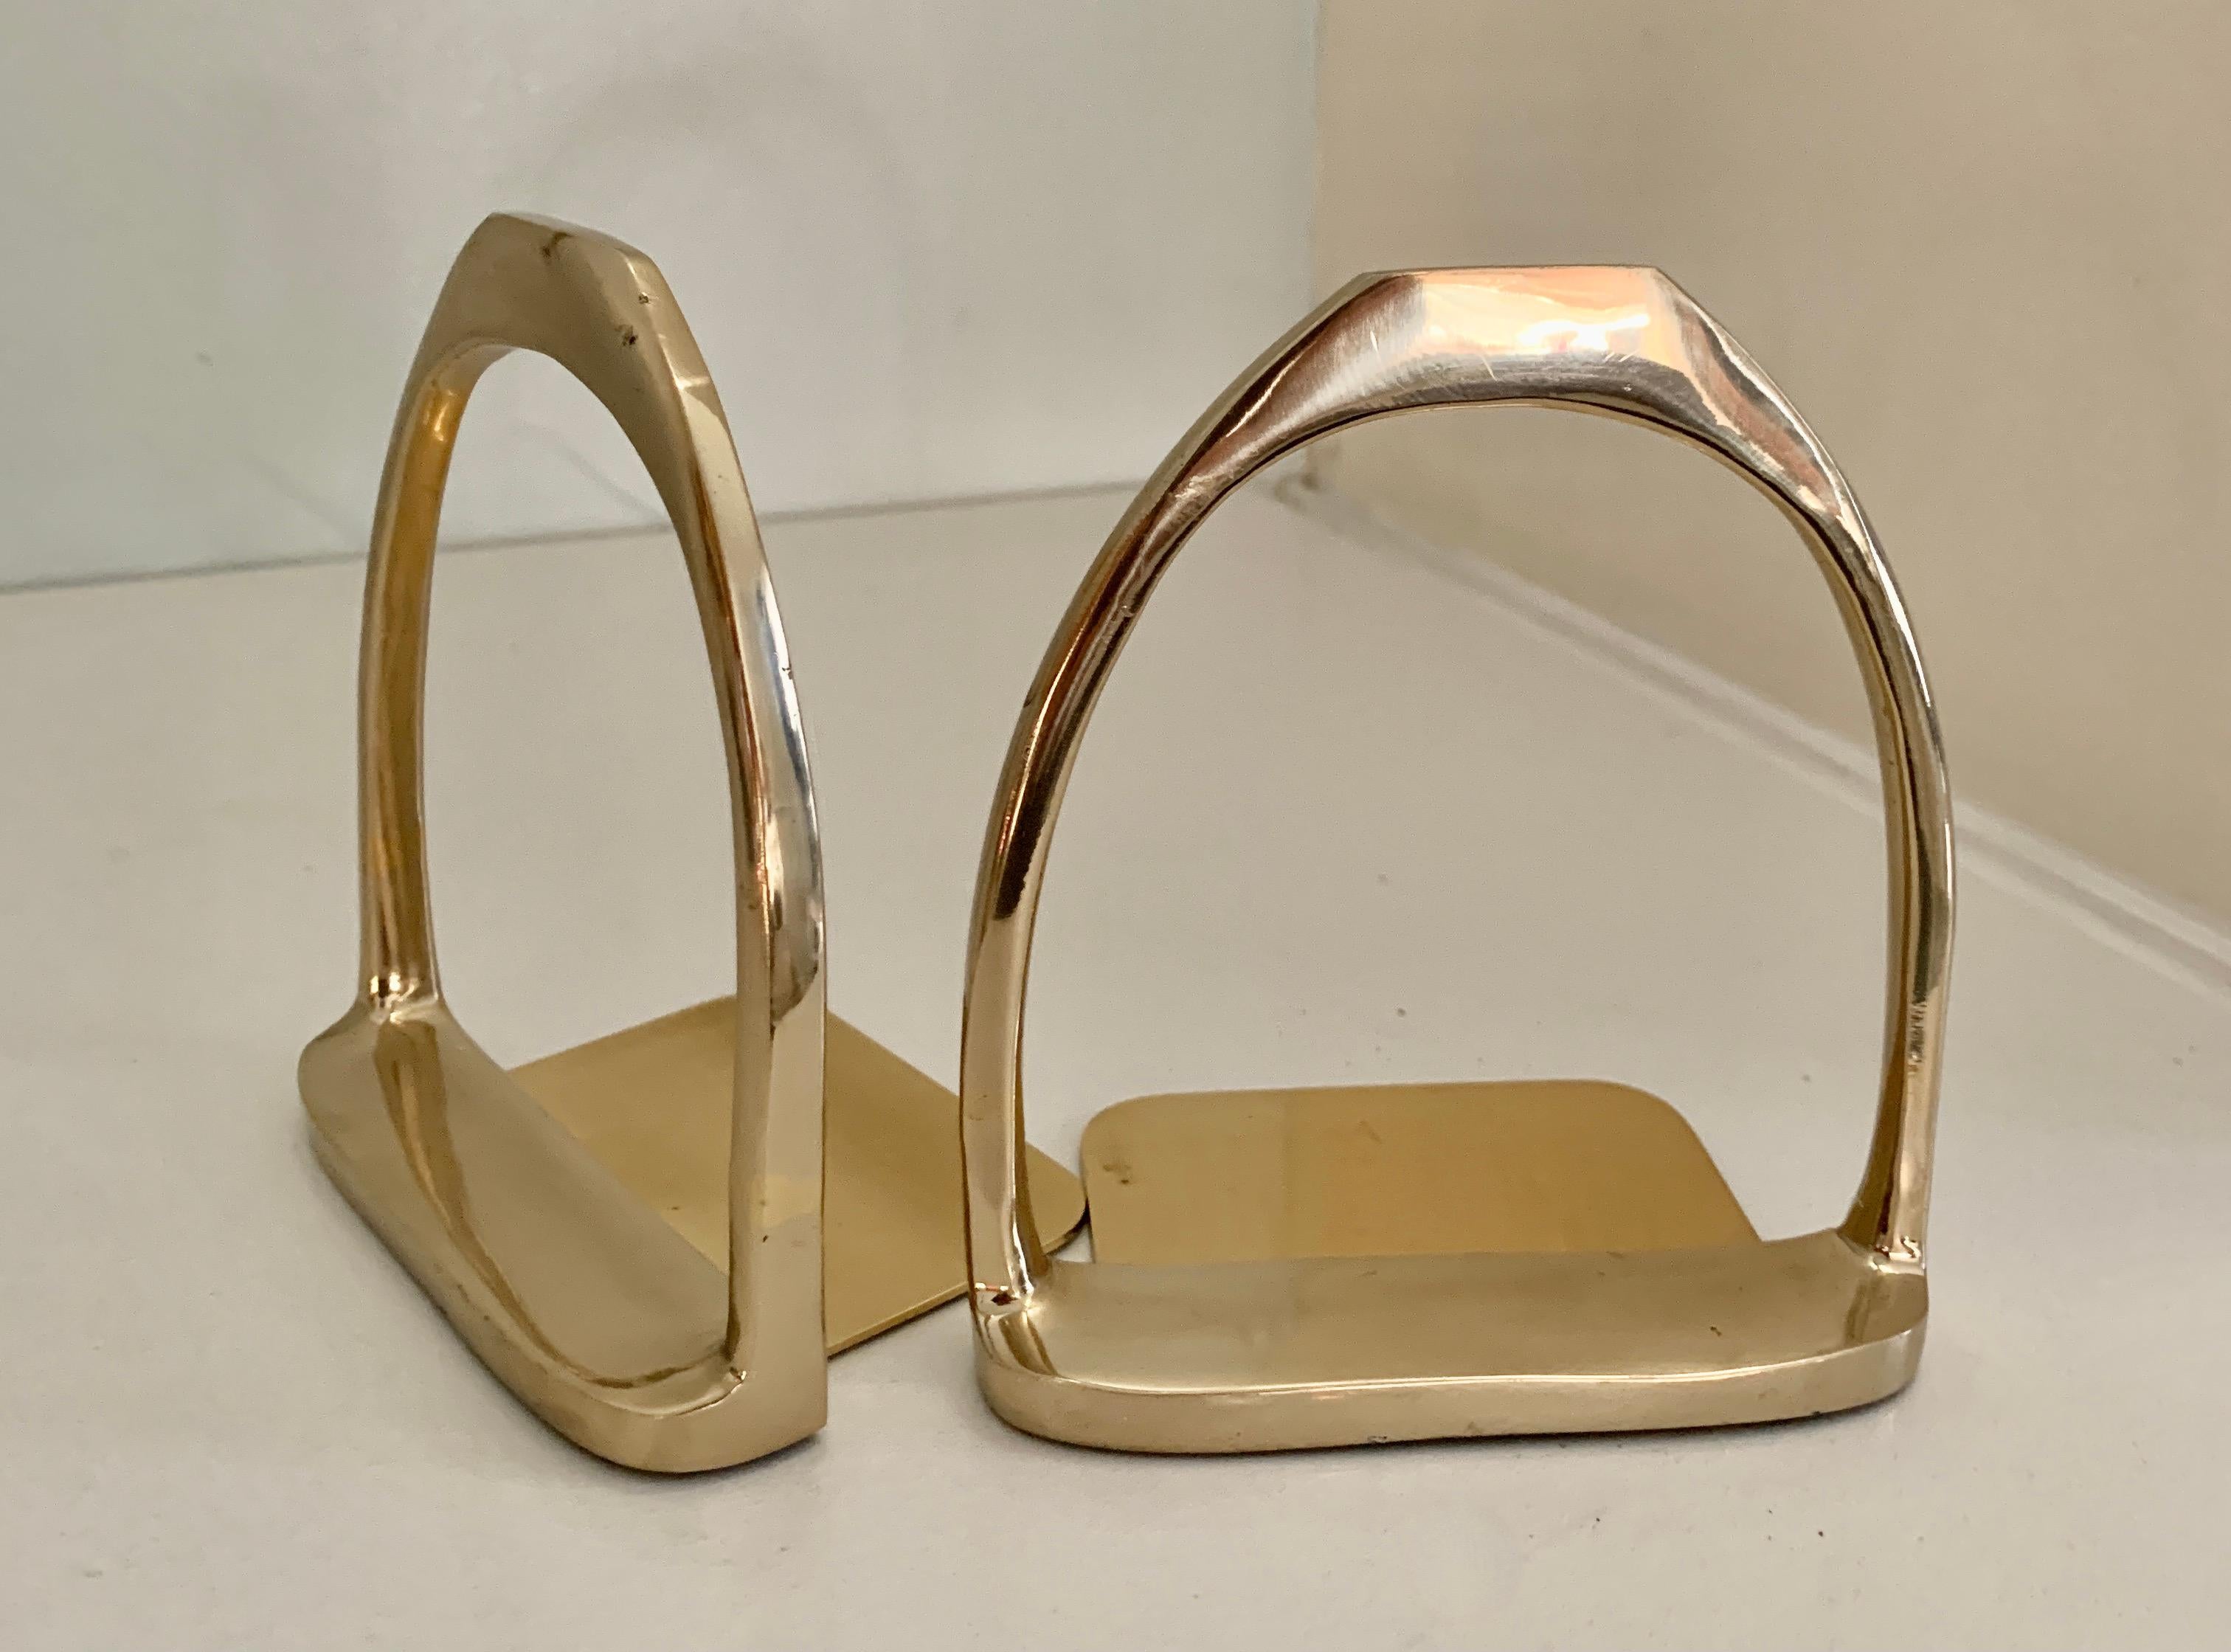 20th Century Pair of Brass Horse Bit Bookends in the Style of Gucci